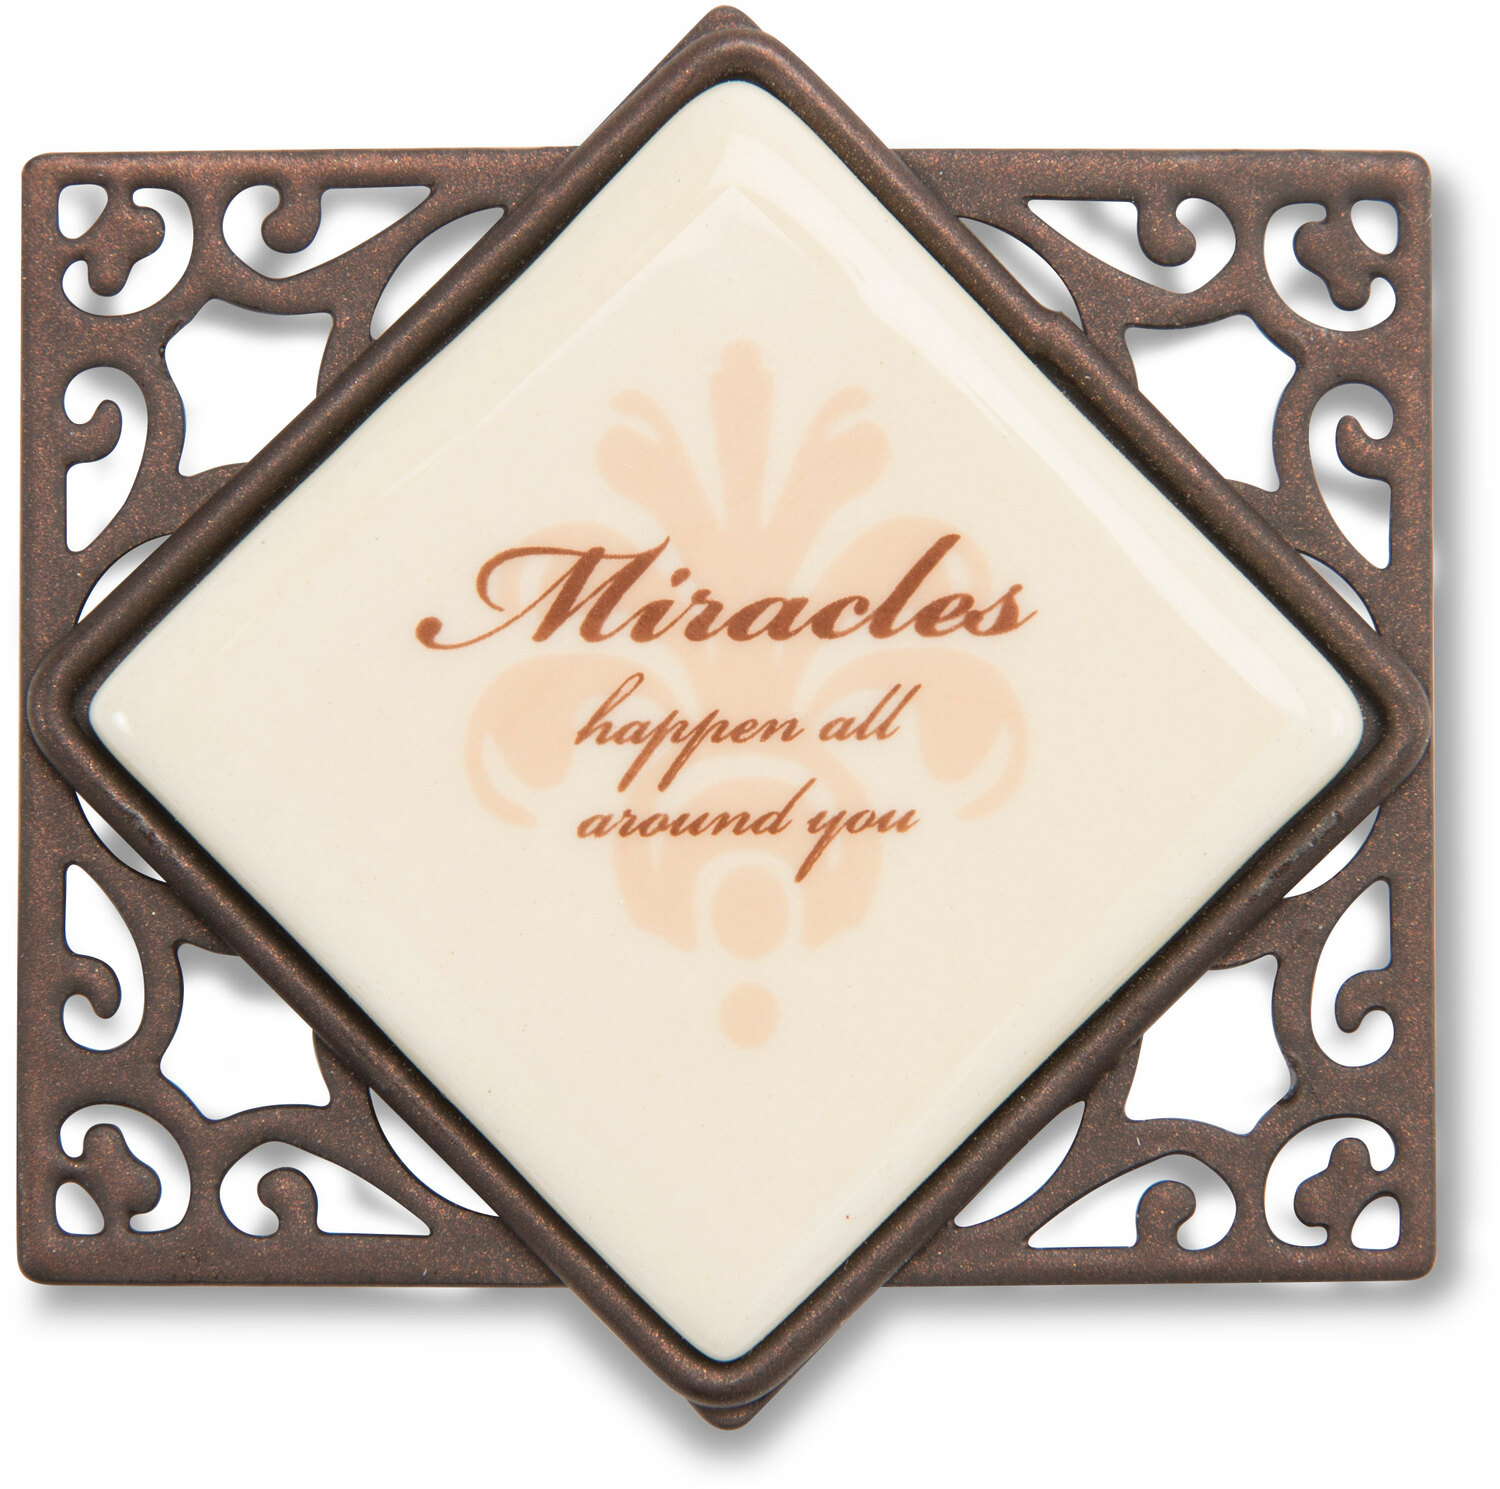 Miracles by Simply Stated - Miracles - 2.25" x 2" Magnet with Scroll (Set of 6)